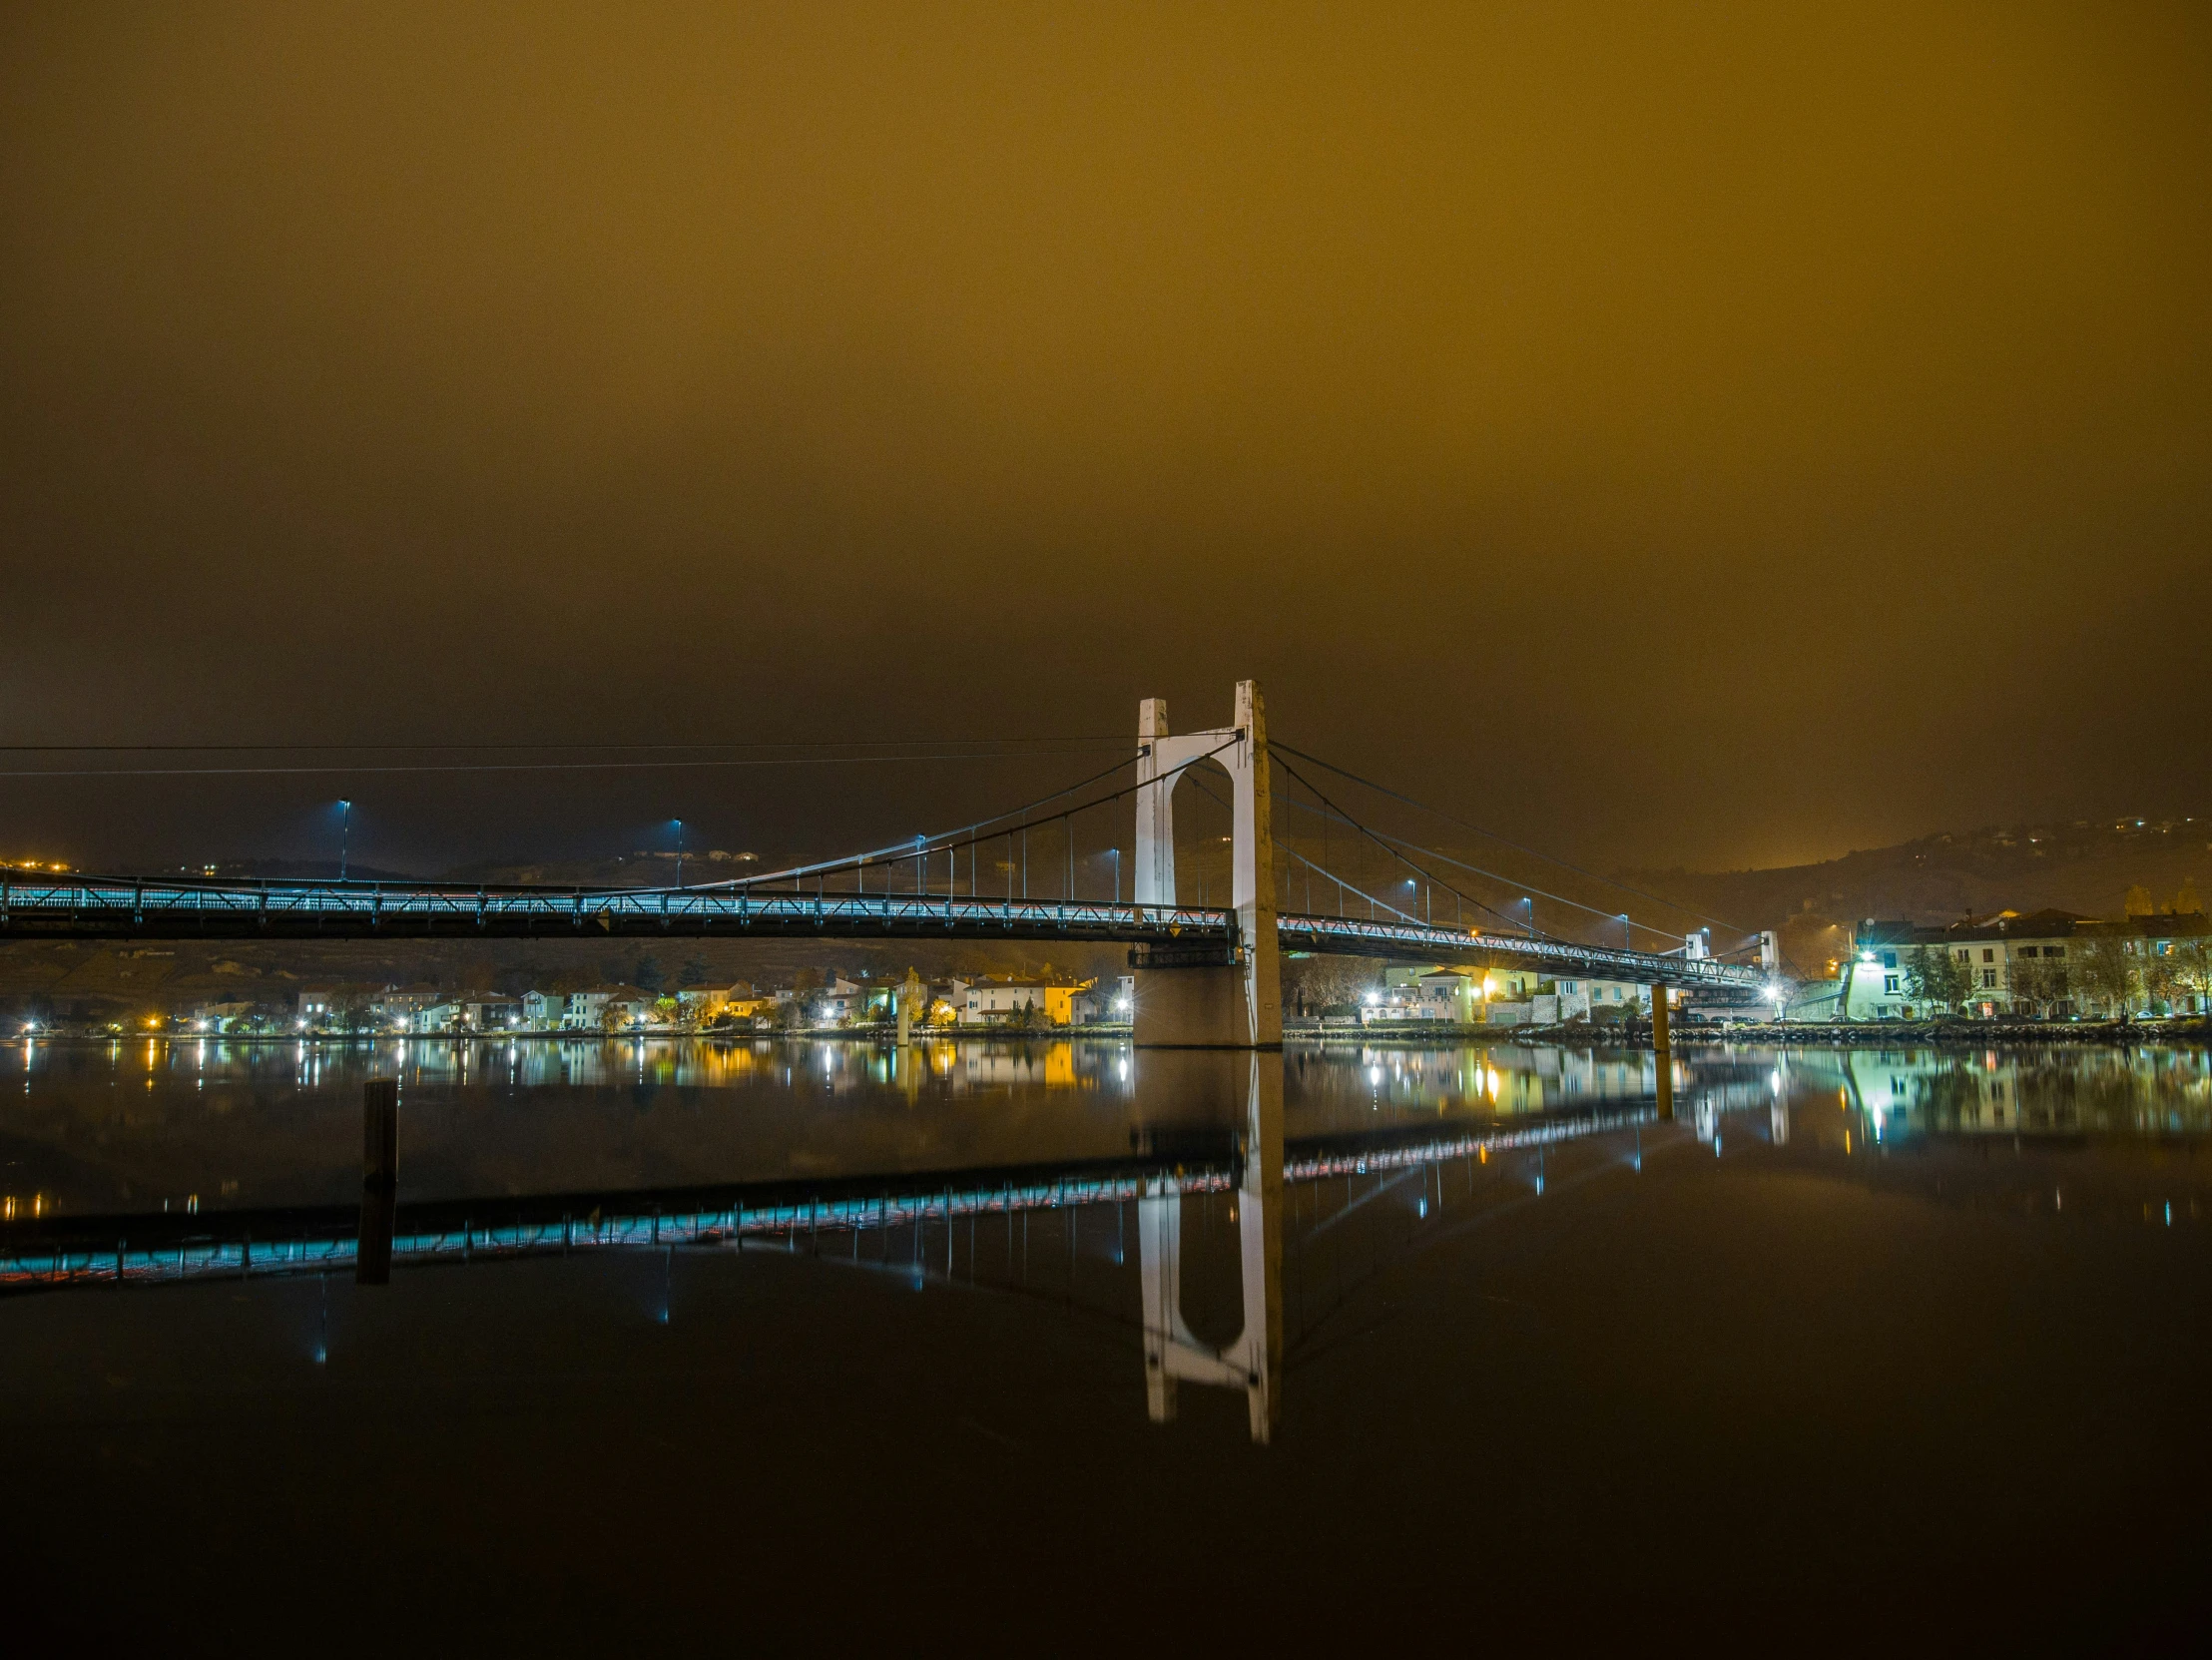 the view of the bay bridge at night from the shore